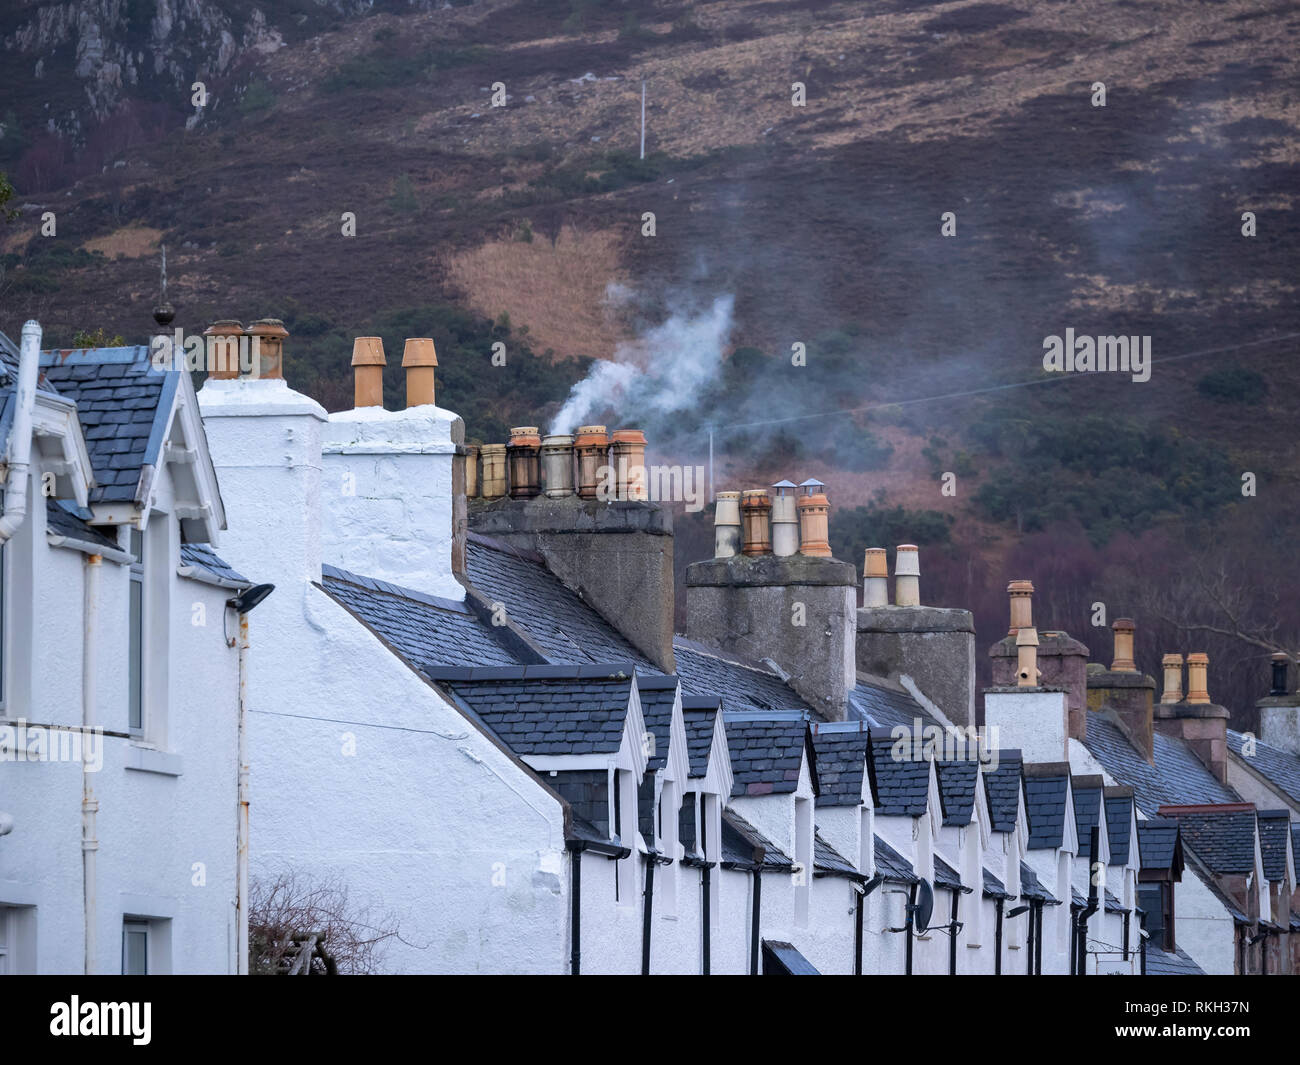 Smoke and domestic chimneys on a row of terraced houses in Shore Street, Ullapool, Highland, Scotland Stock Photo